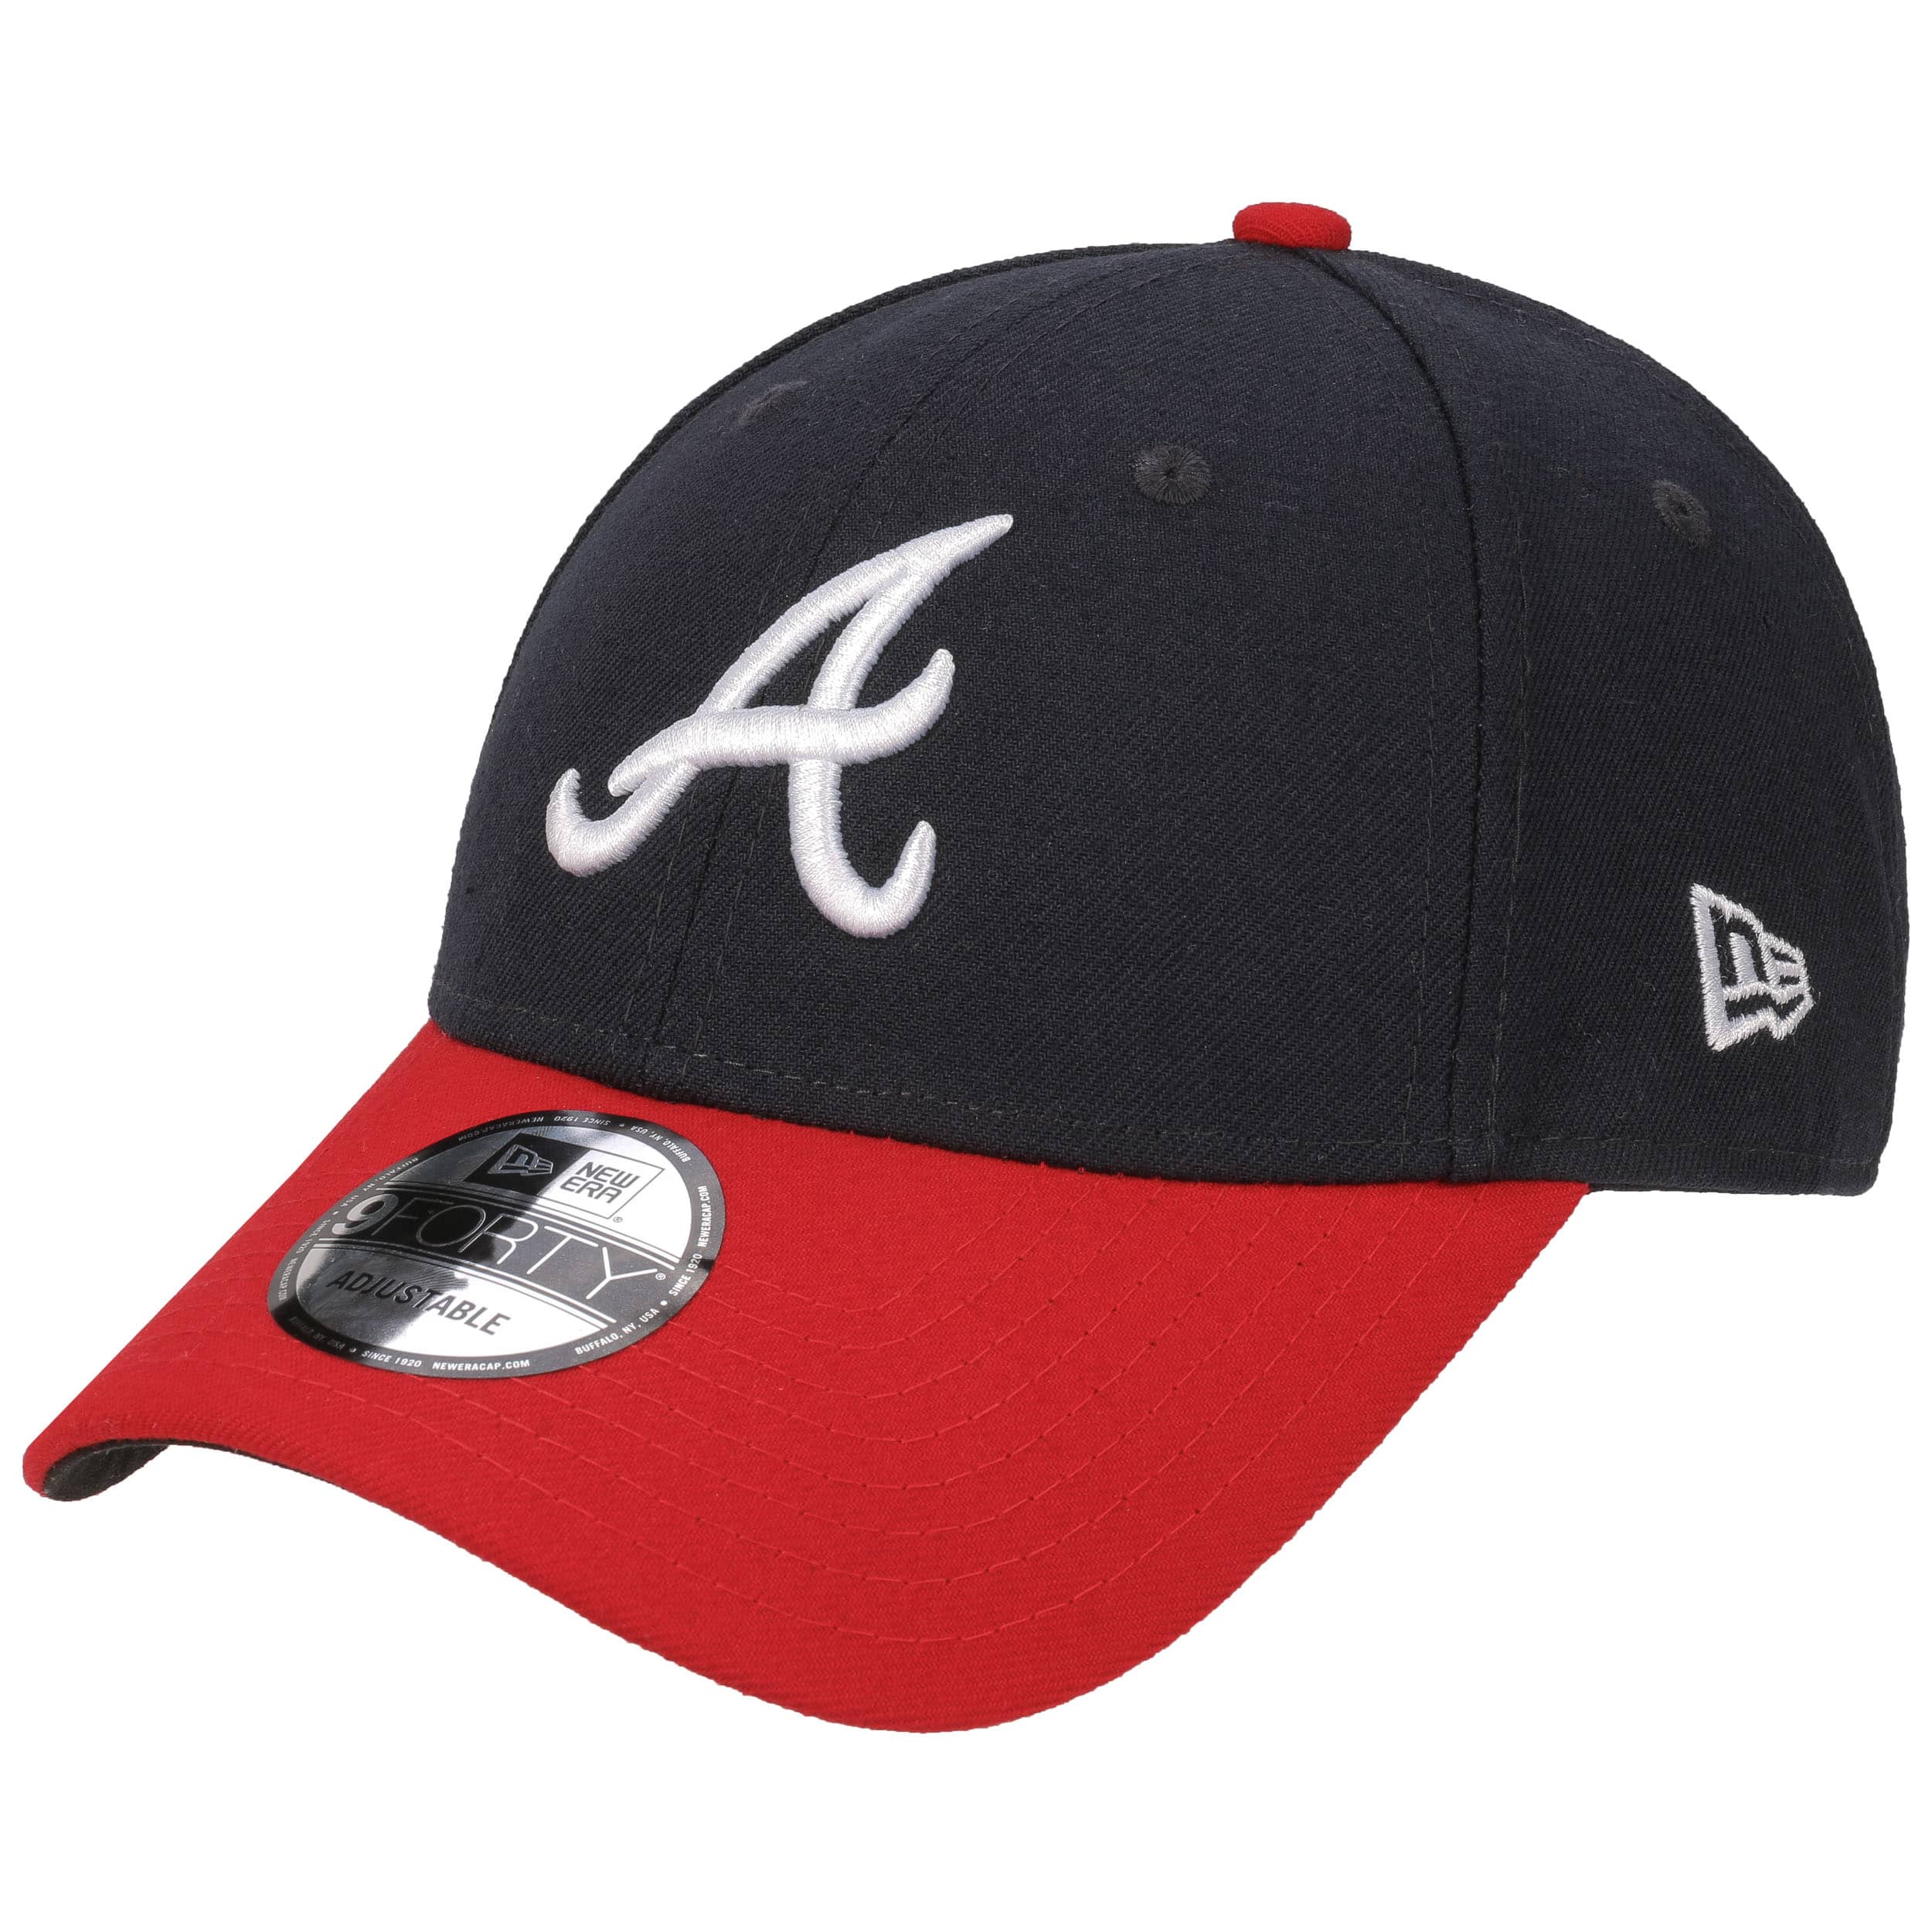 The Braves Pet by New Era - €